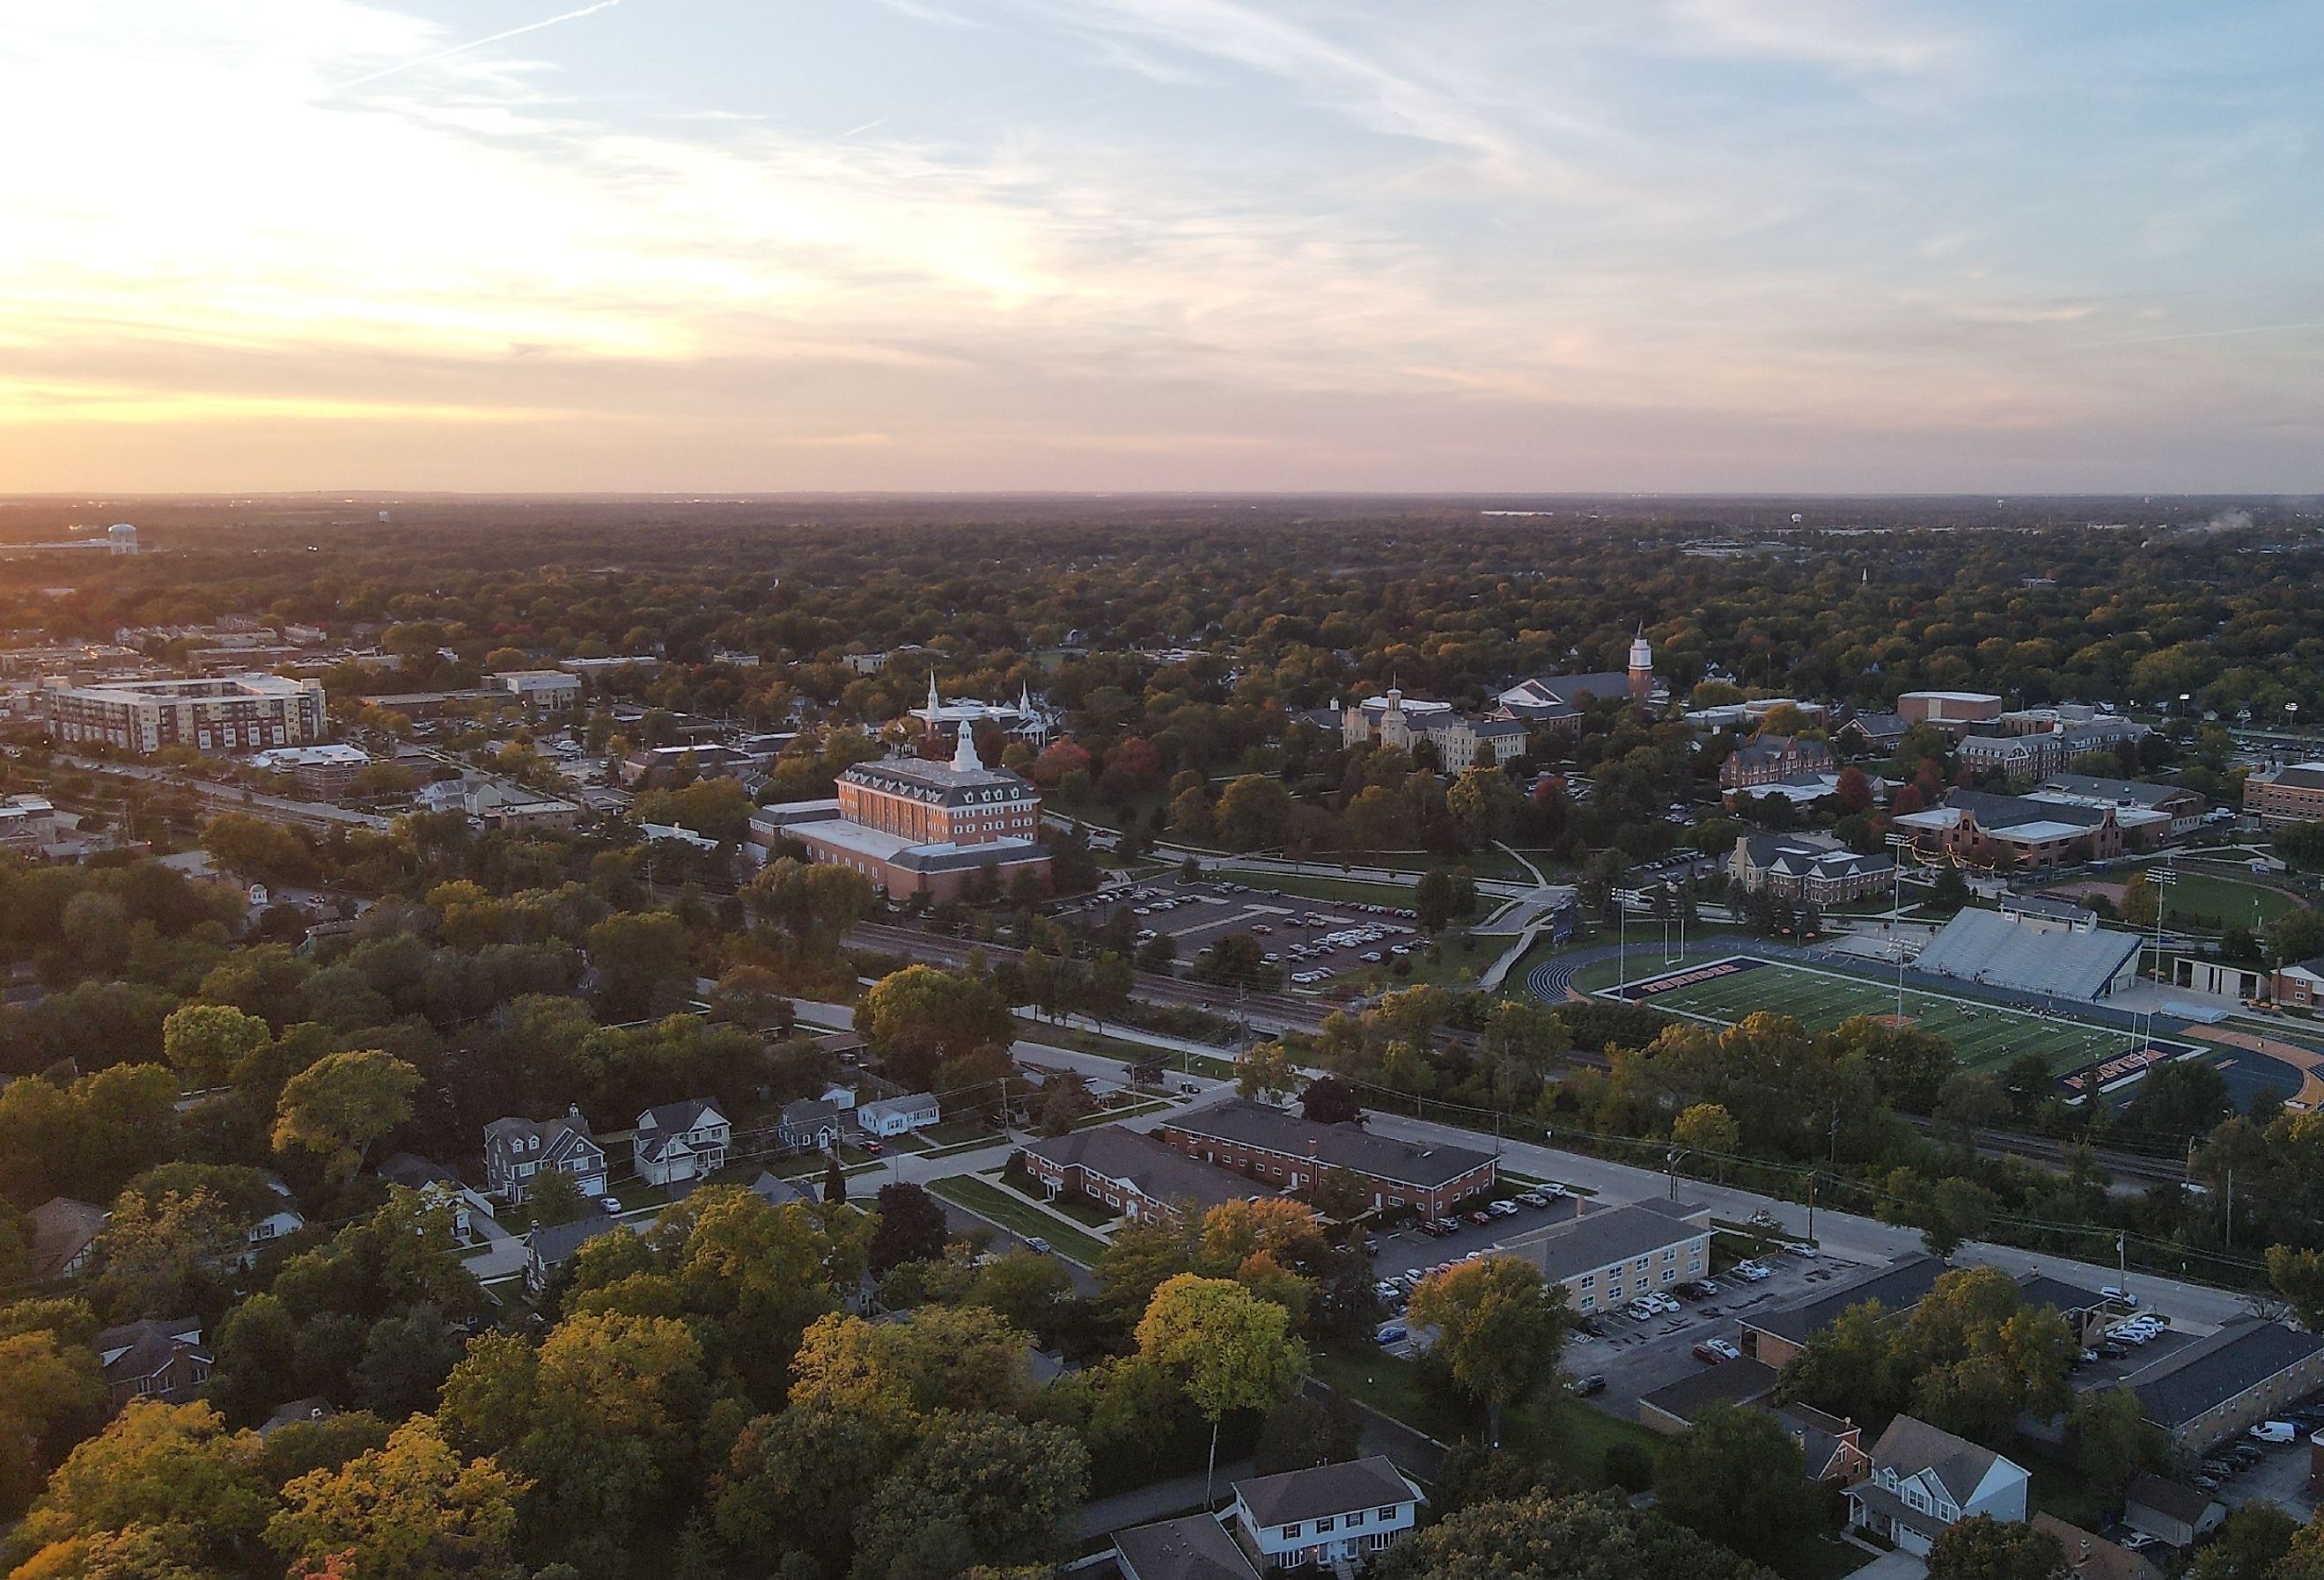 Aerial view of Wheaton, Illinois at sunset.